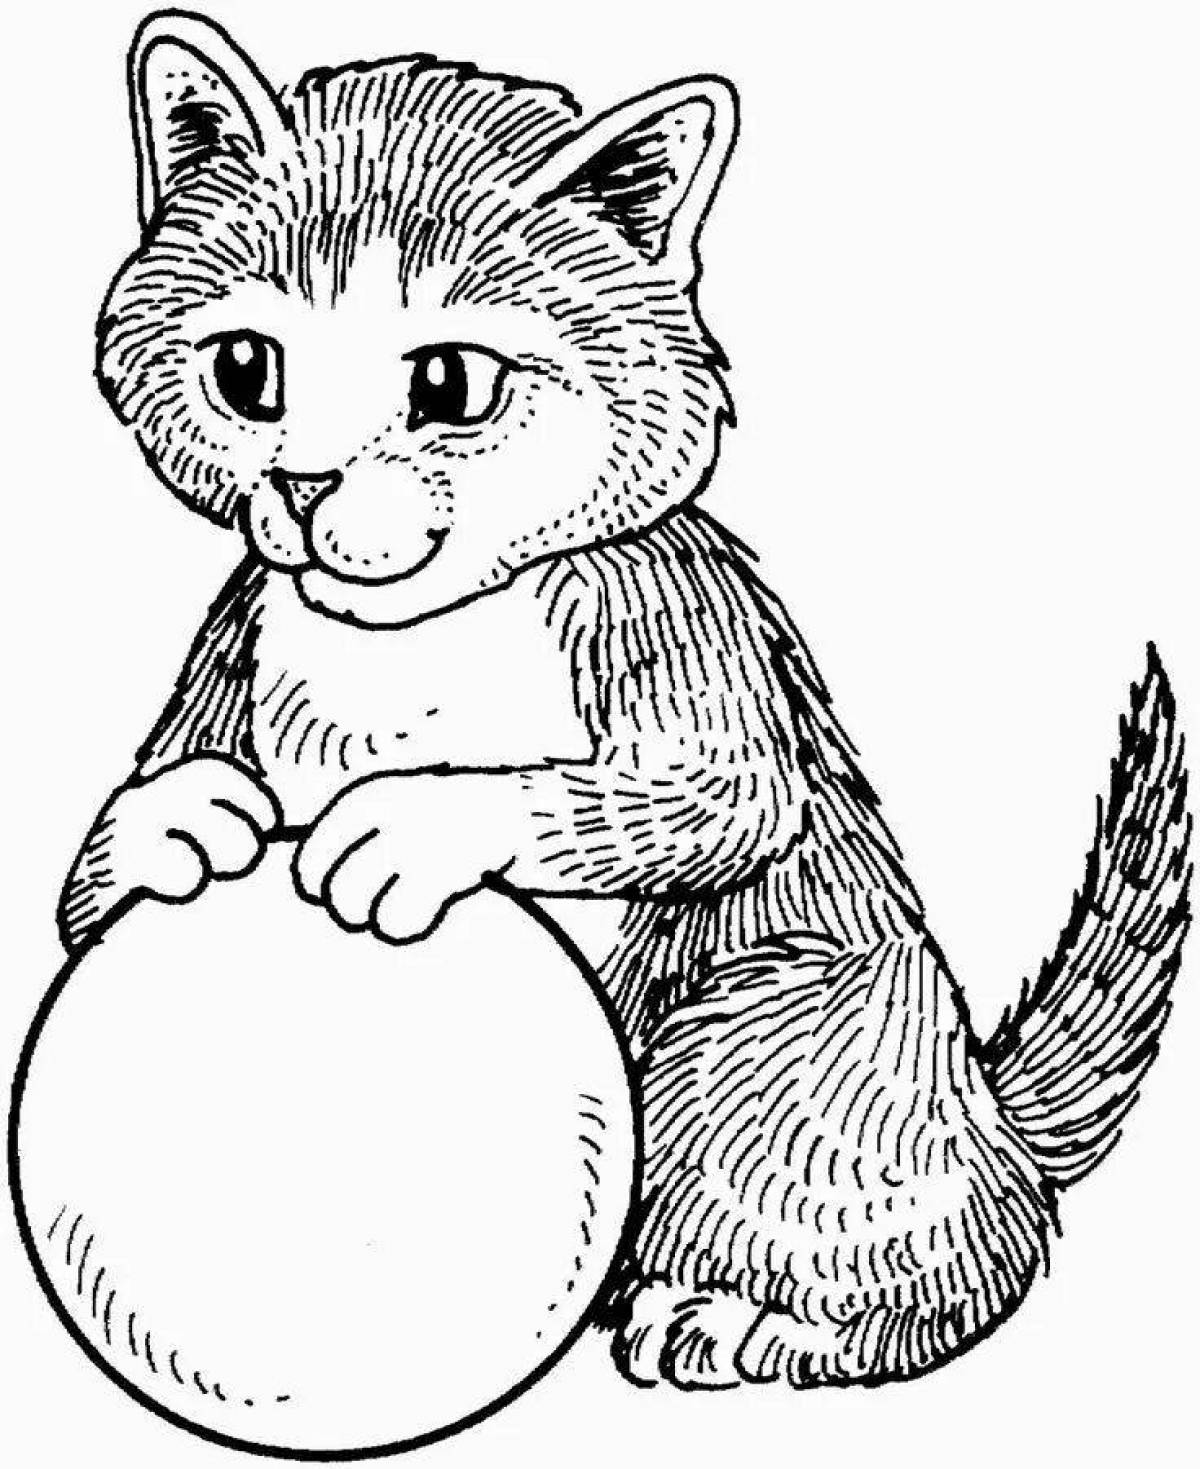 Coloring page friendly kitten with a ball